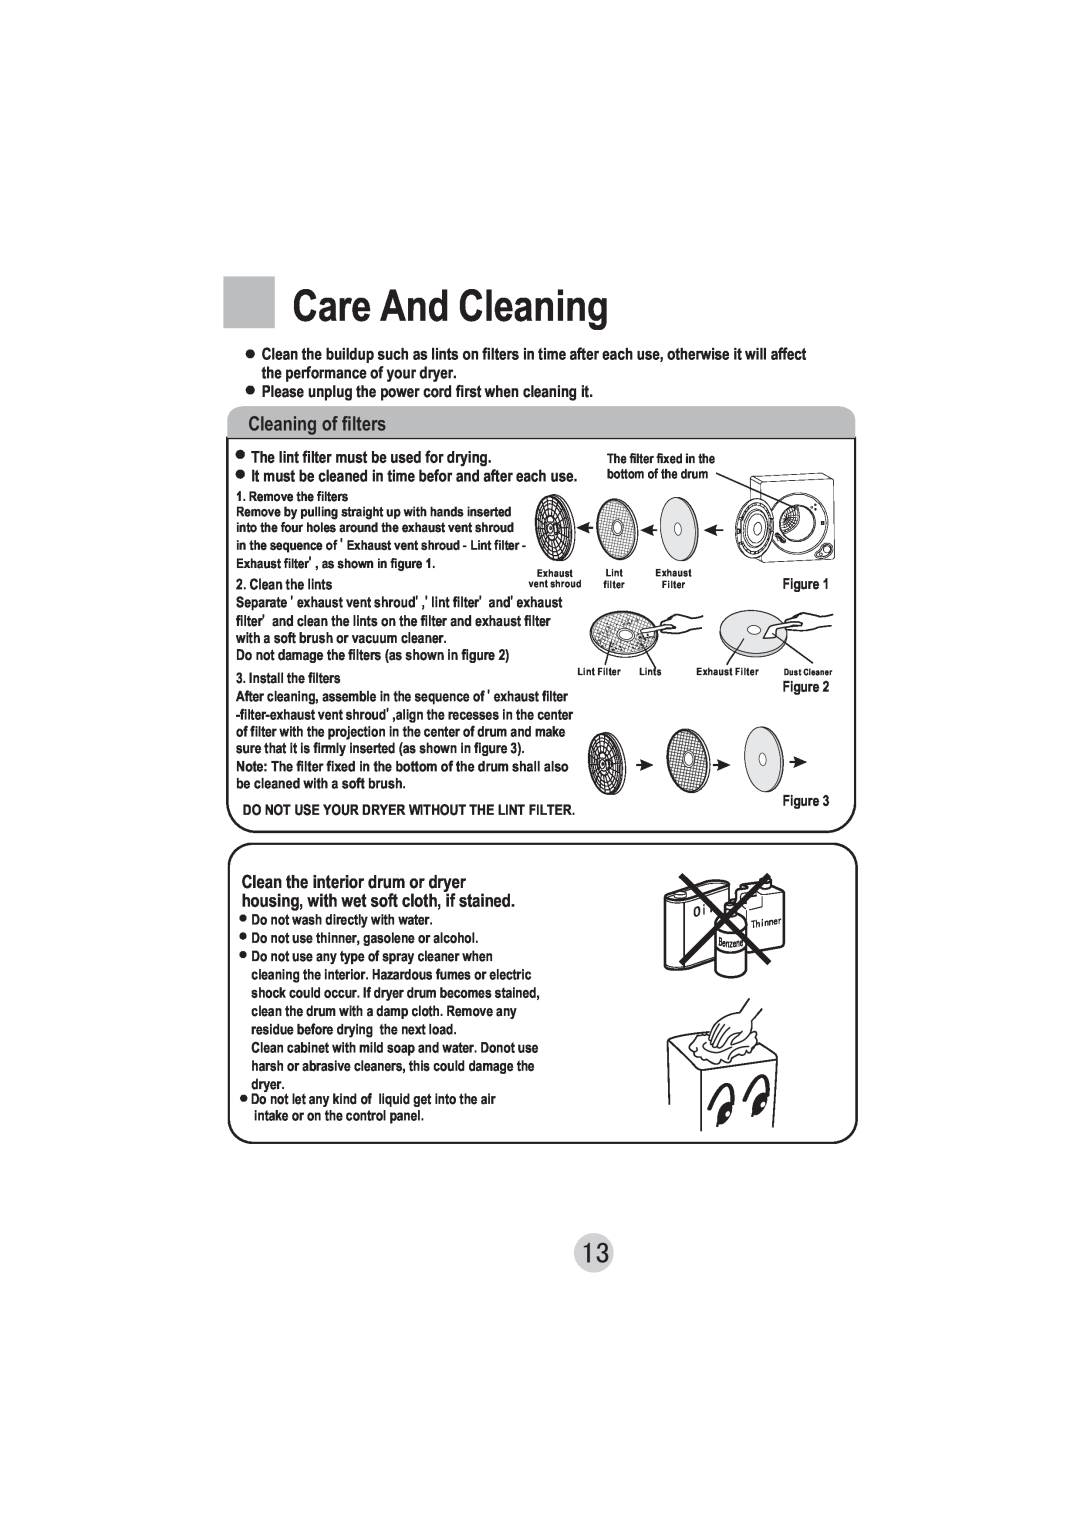 Technika T50DM manual Care And Cleaning, Cleaning of filters 